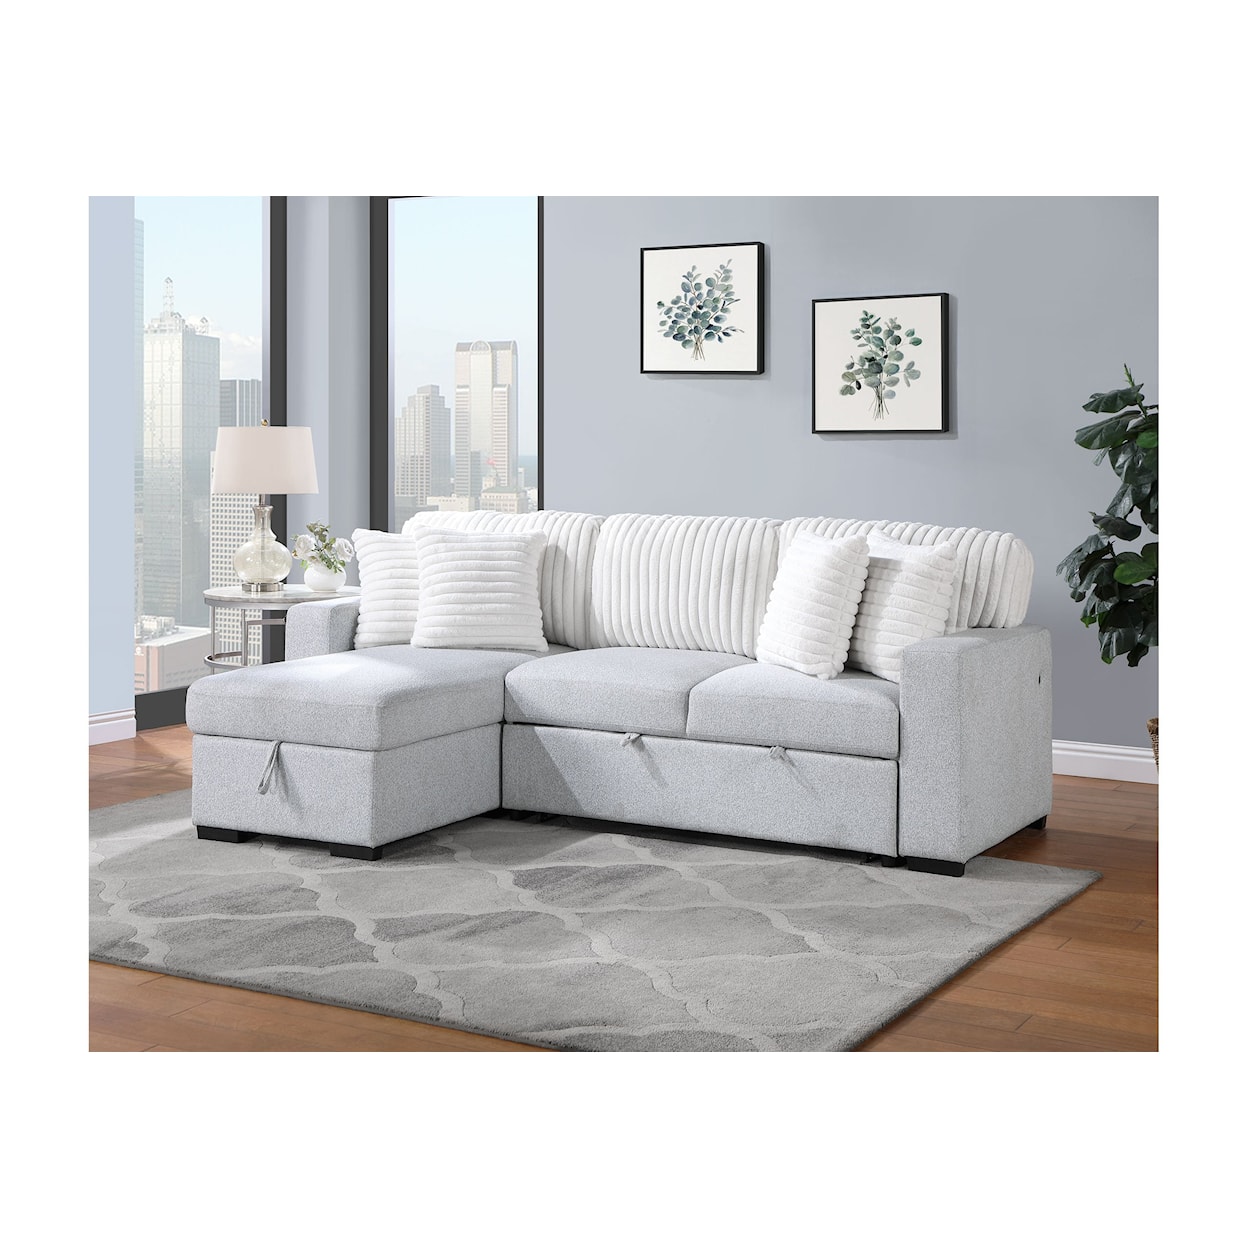 Global Furniture U0204 Light Grey/White Reversible Chaise with Storage